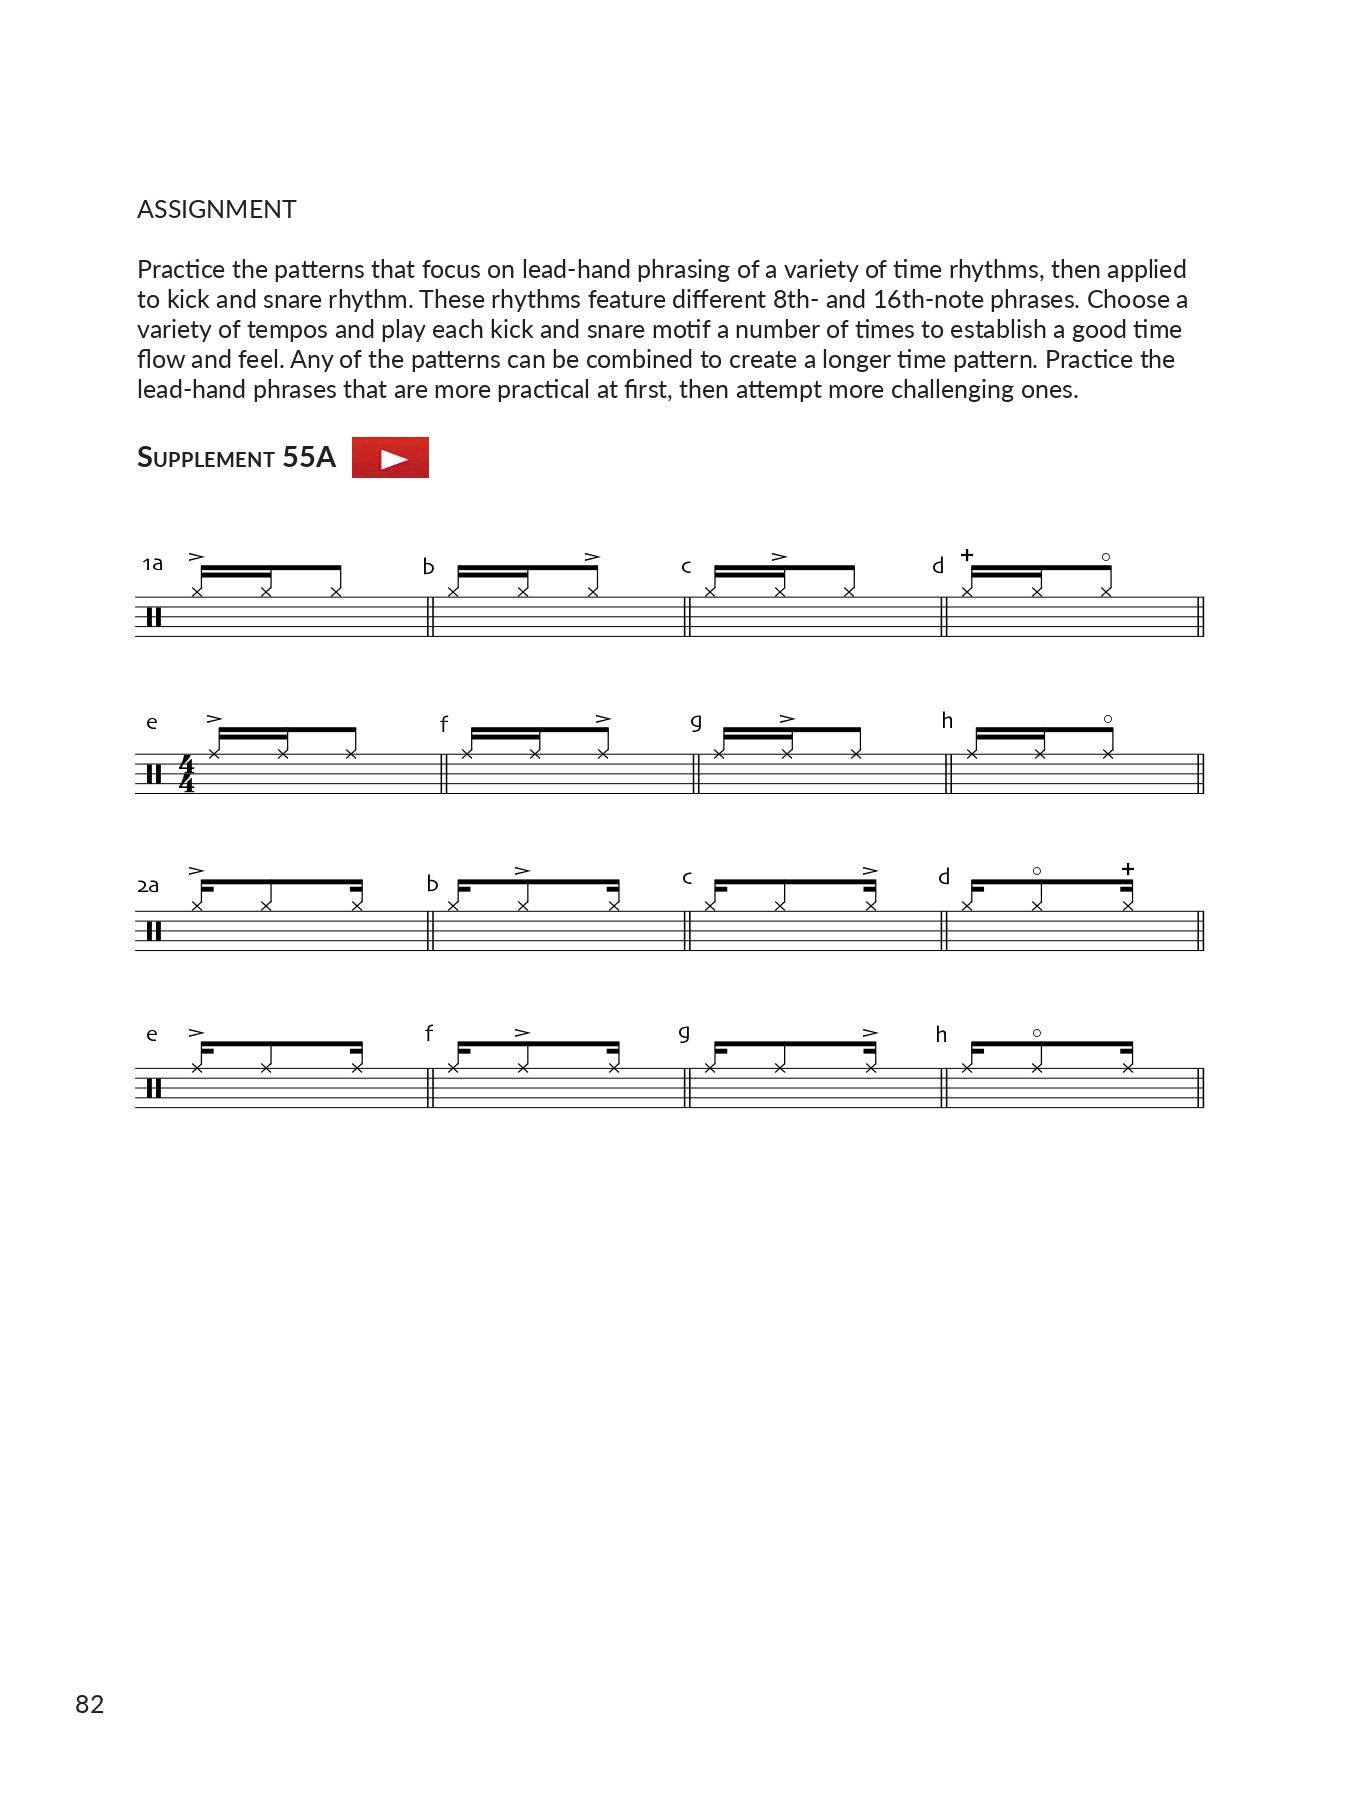 Drums - Playing Techniques Book 4